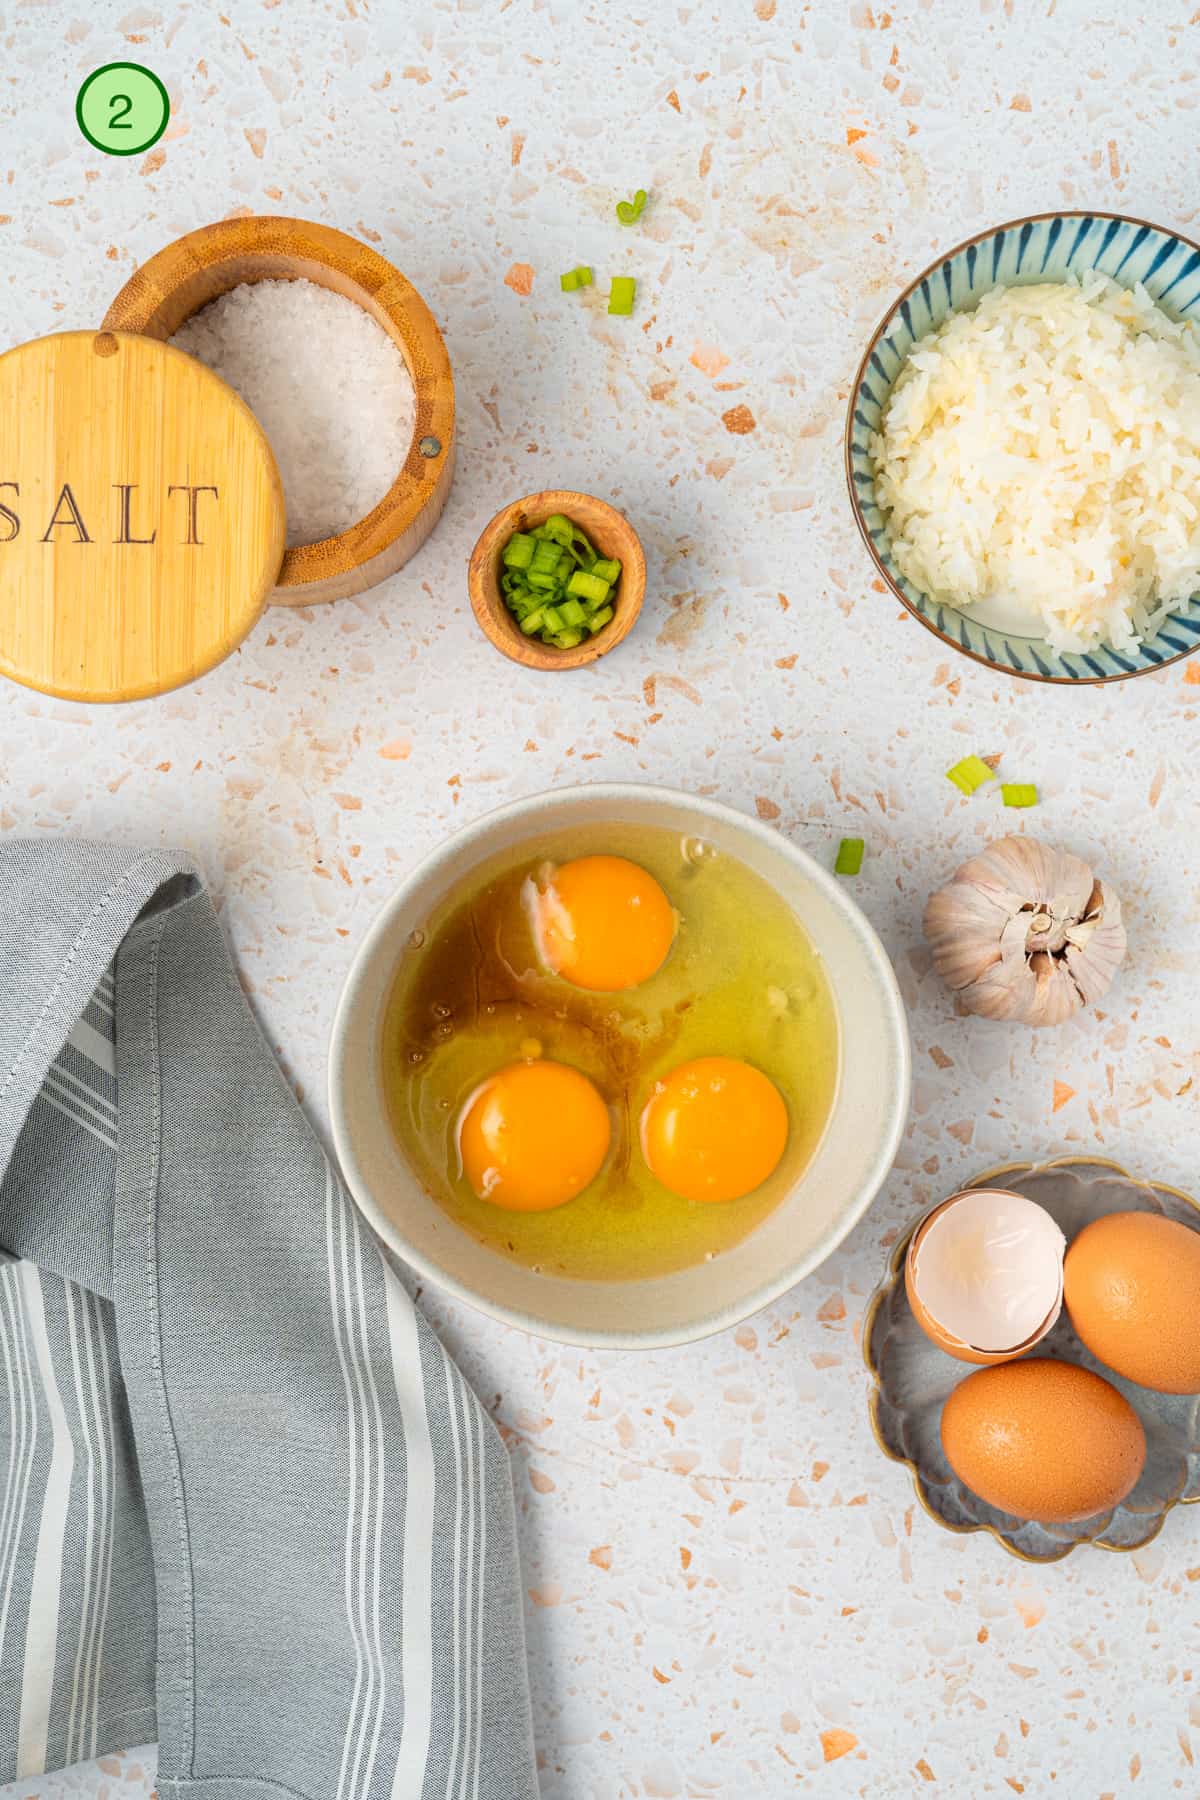 Whisk the eggs and seasonings in a bowl.